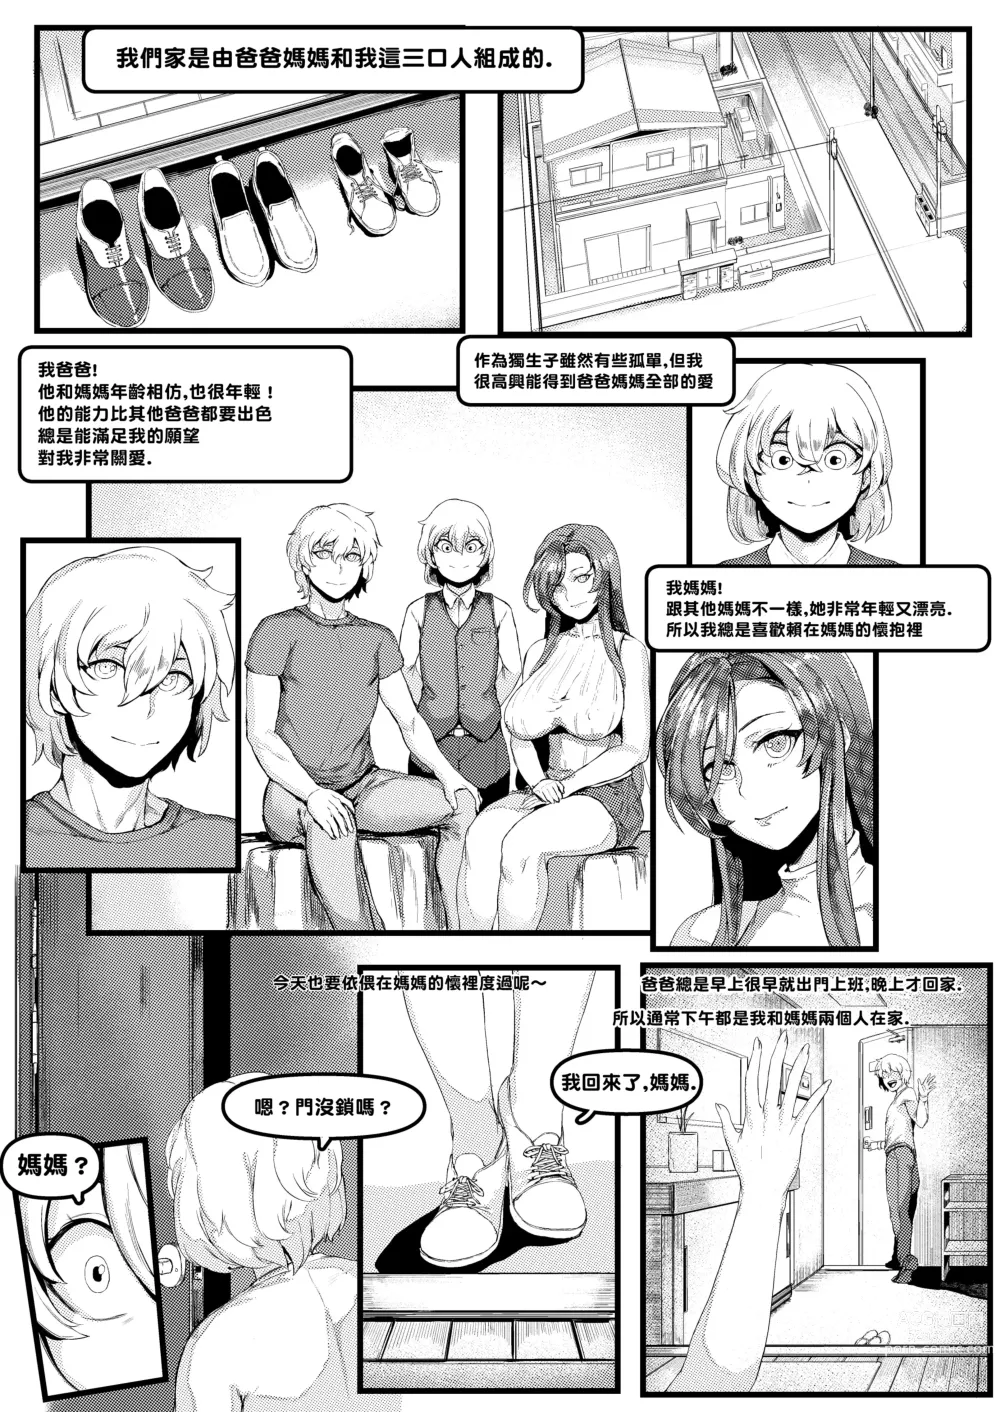 Page 1 of doujinshi mtr comission